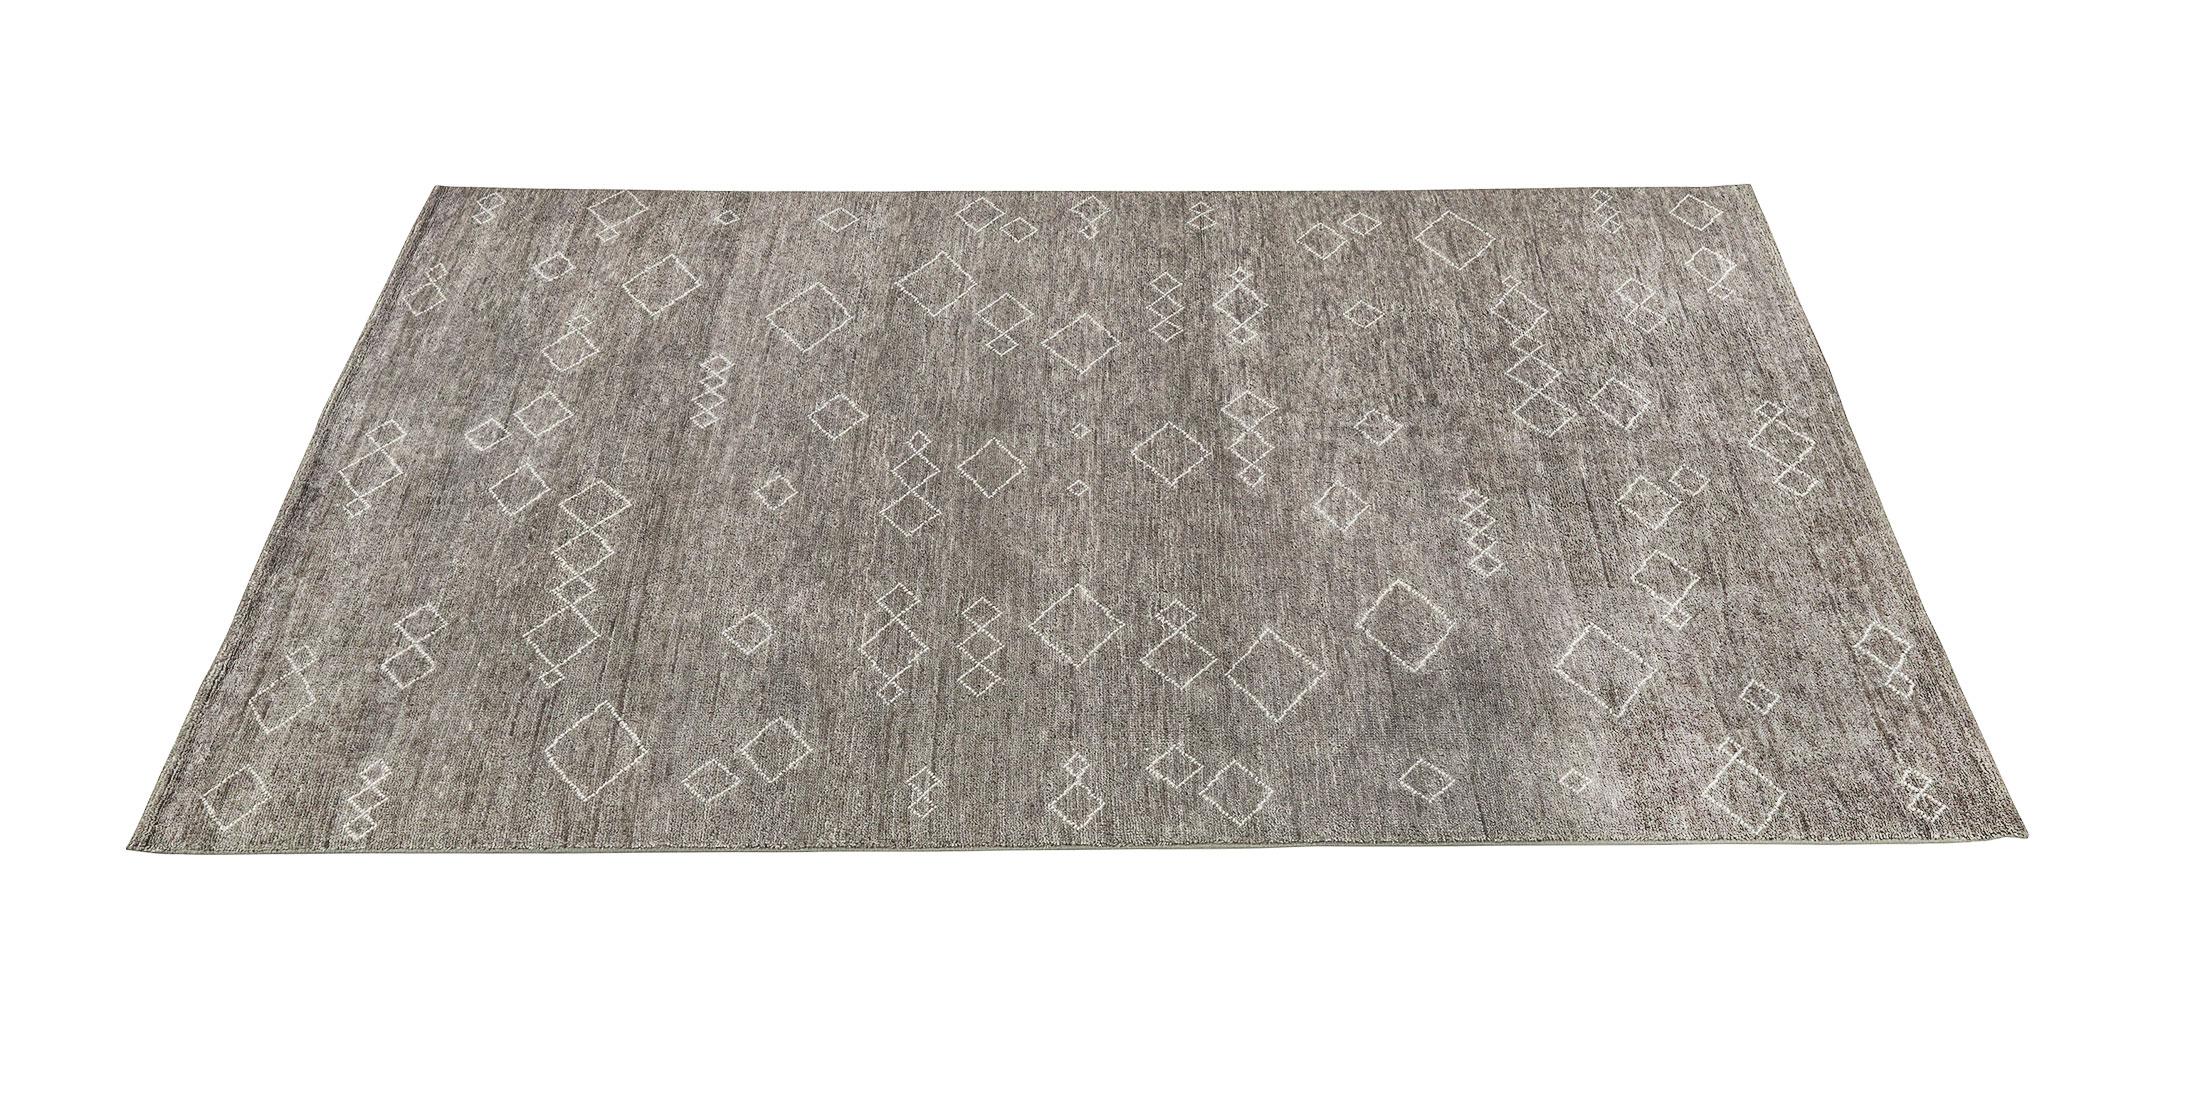 For Sale: Gray (Graphite/Sand) Ben Soleimani Arisa Rug– Moroccan Hand-knotted Plush Wool Carbon/Mist 10'x14' 2